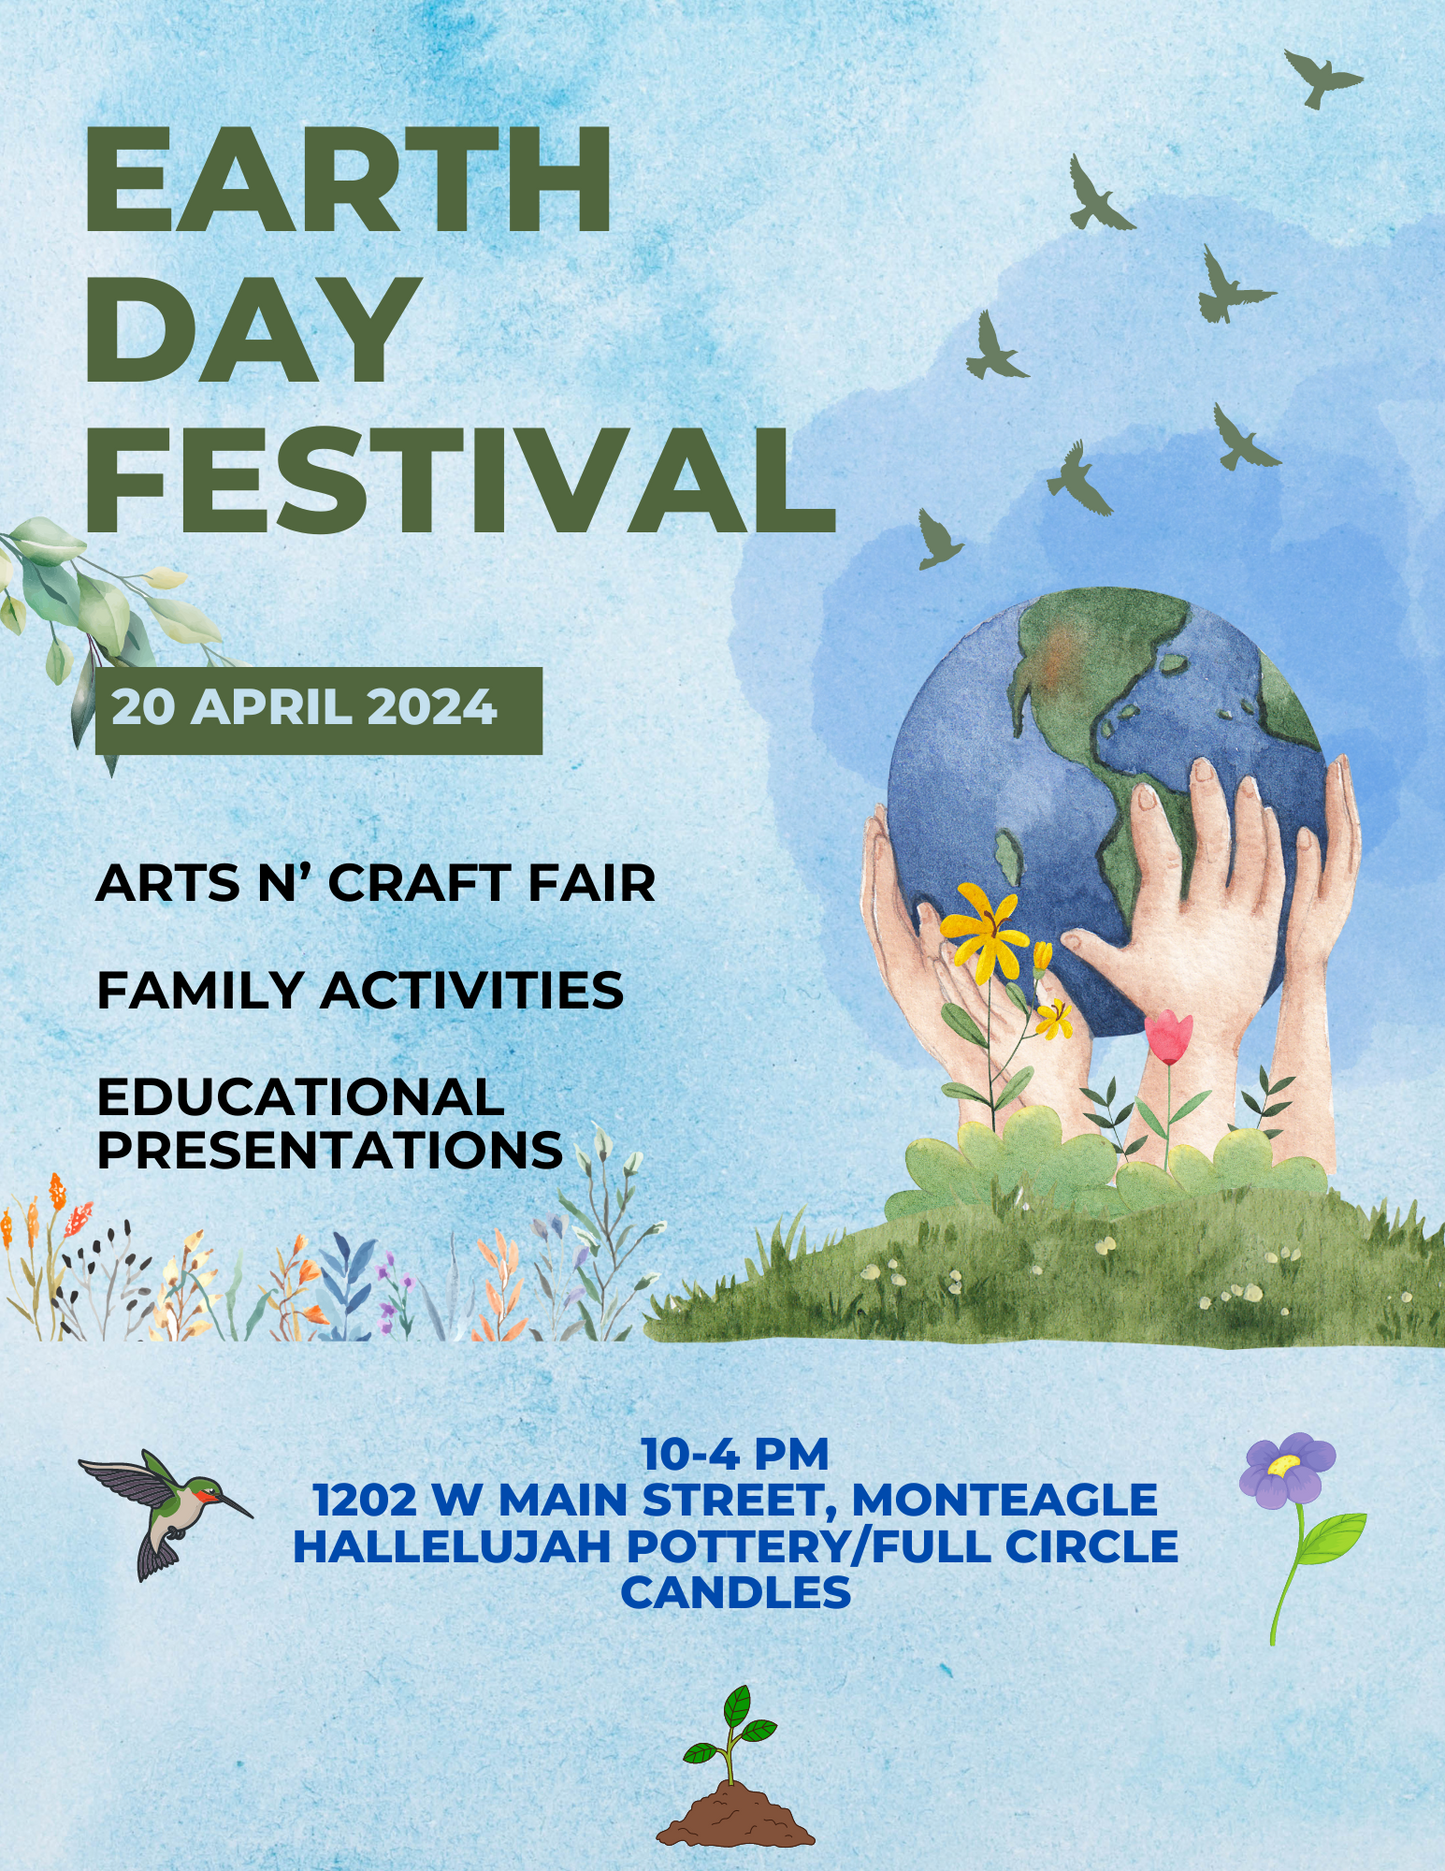 Full Circle/Hallelujah Pottery Earth Day Festival Saturday, April 20th FREE EVENT 10-4